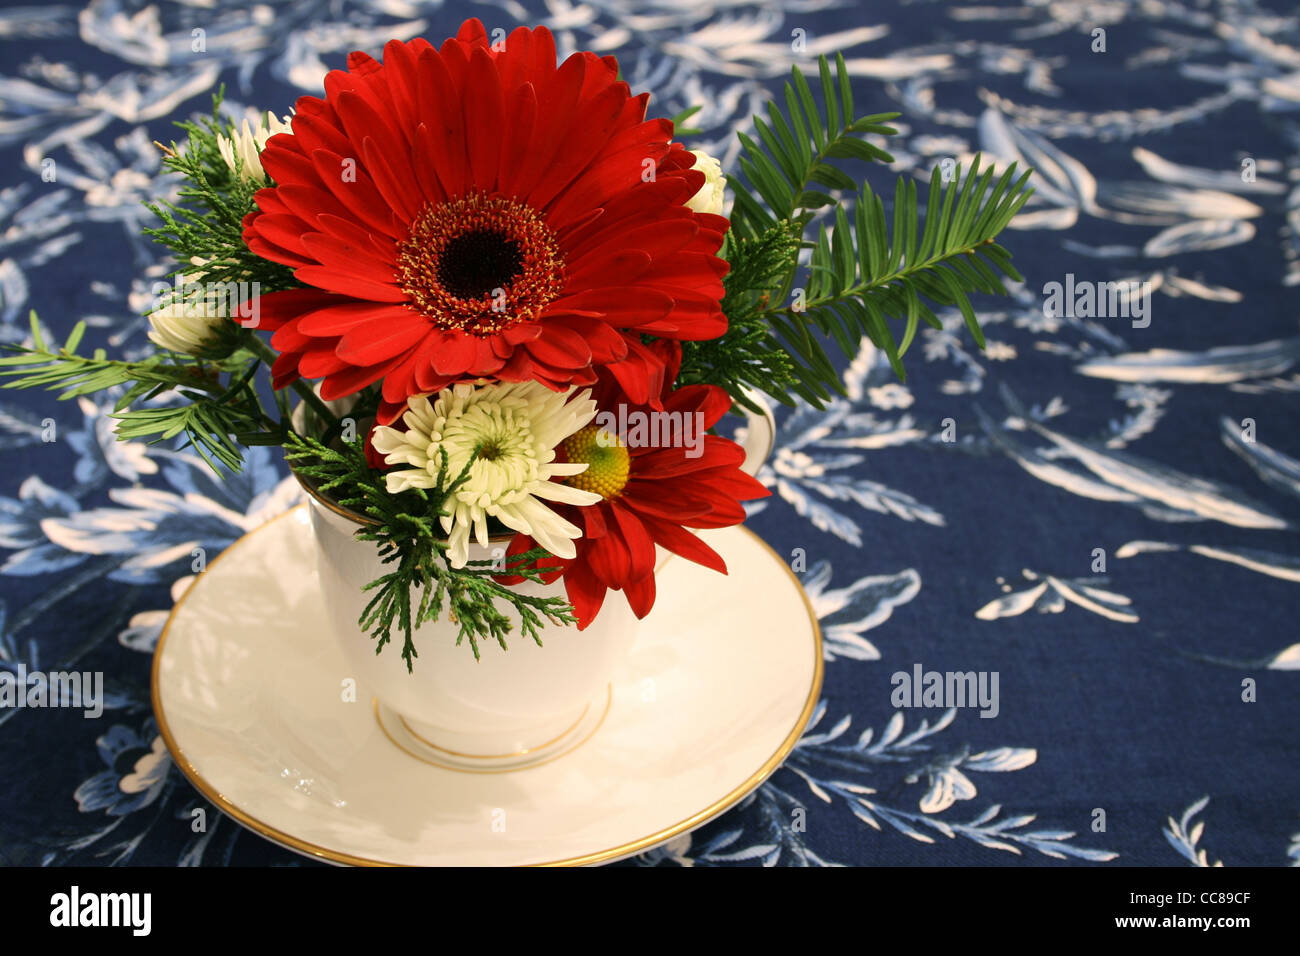 red and white flowers in a cup as a centerpiece on a blue floral tablecloth Stock Photo